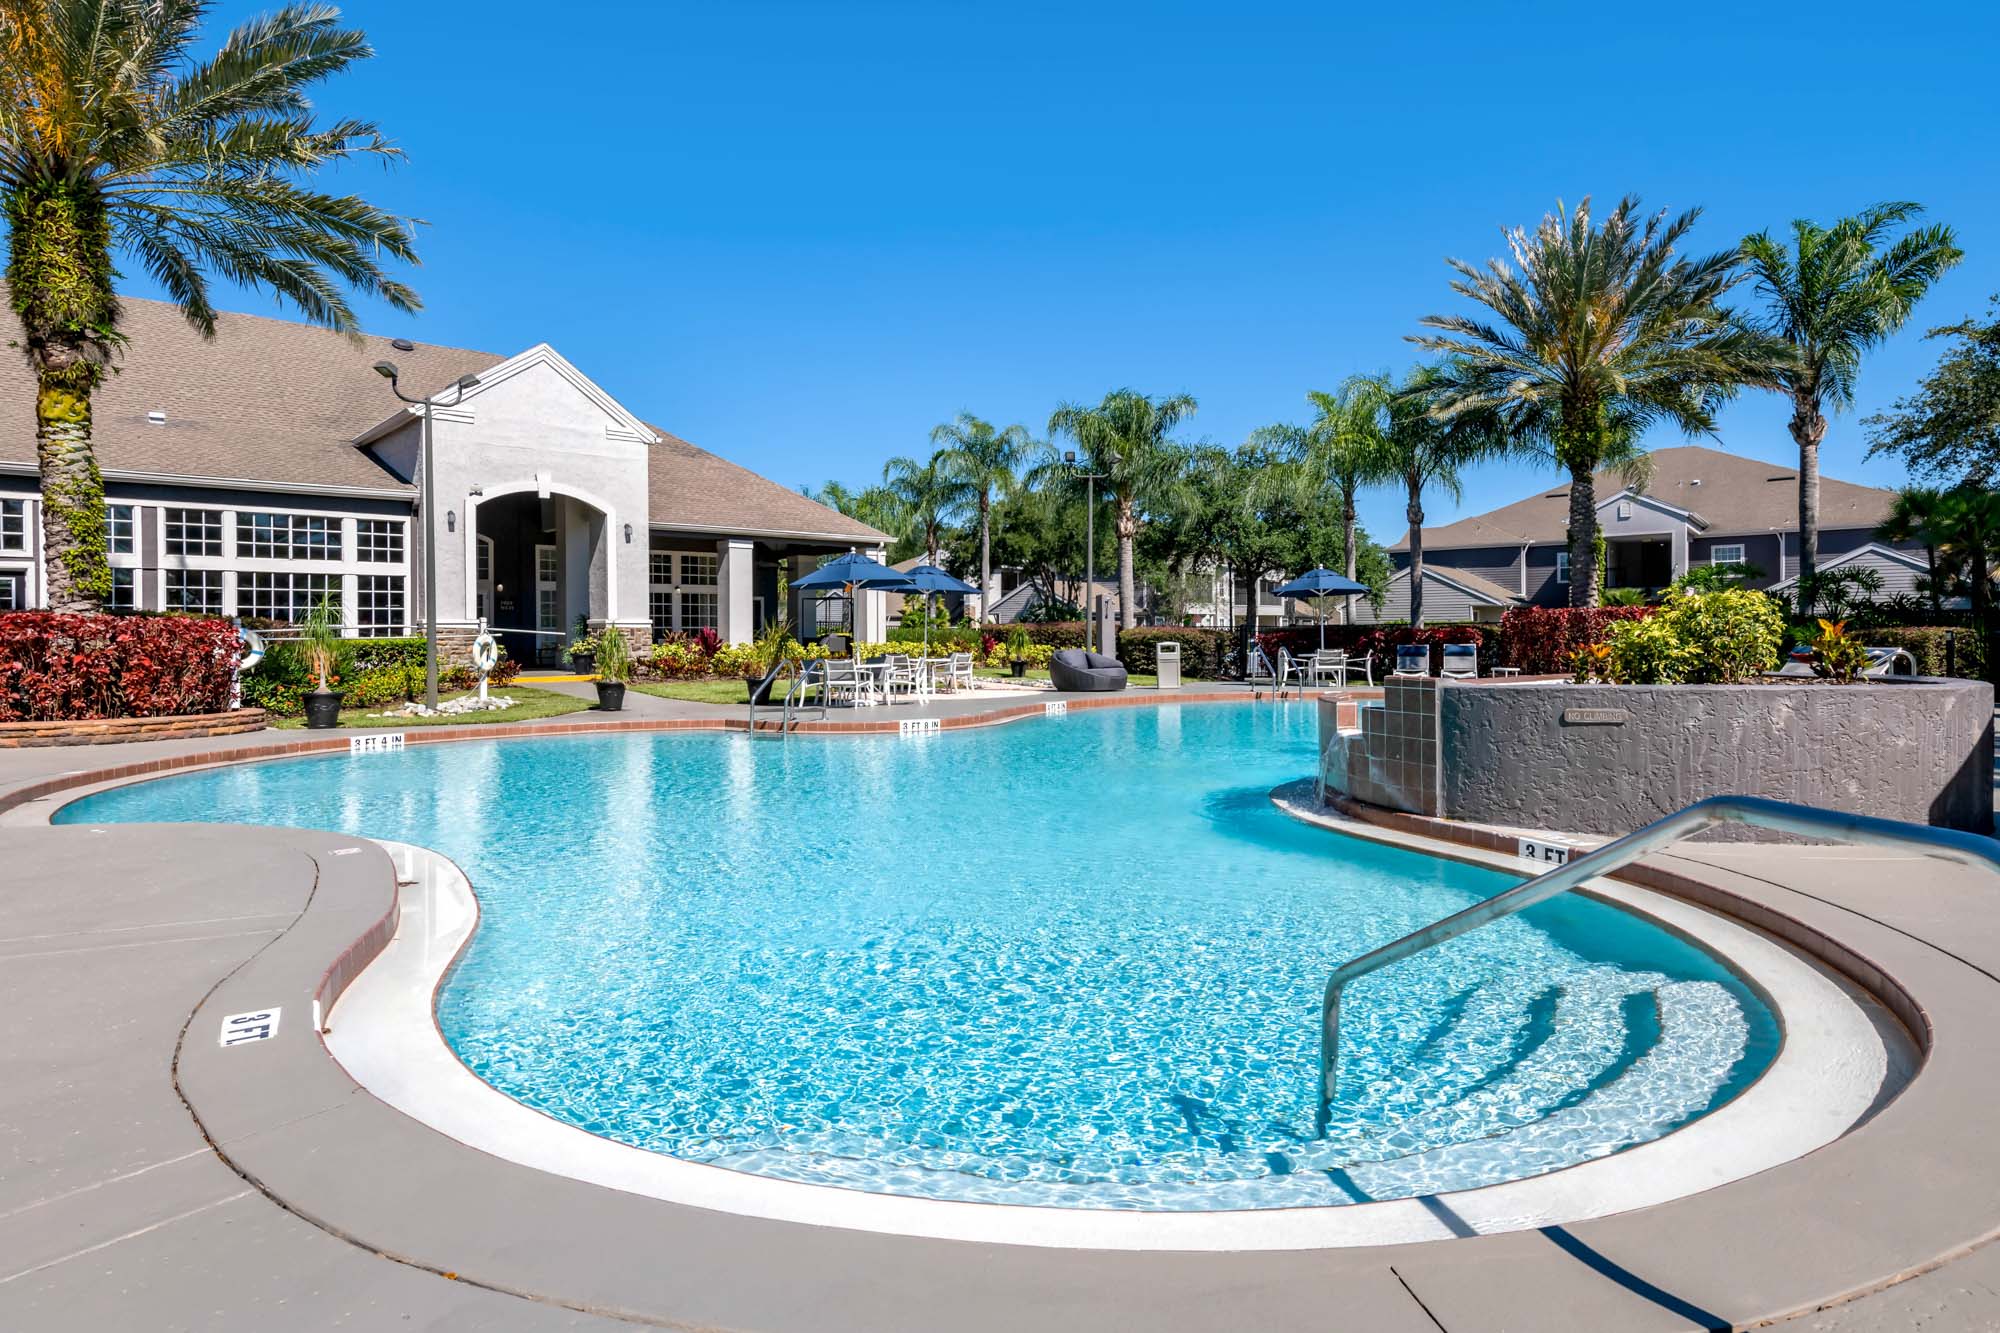 The pool at Osprey Links at Hunter's Creek in Orlando, Florida.